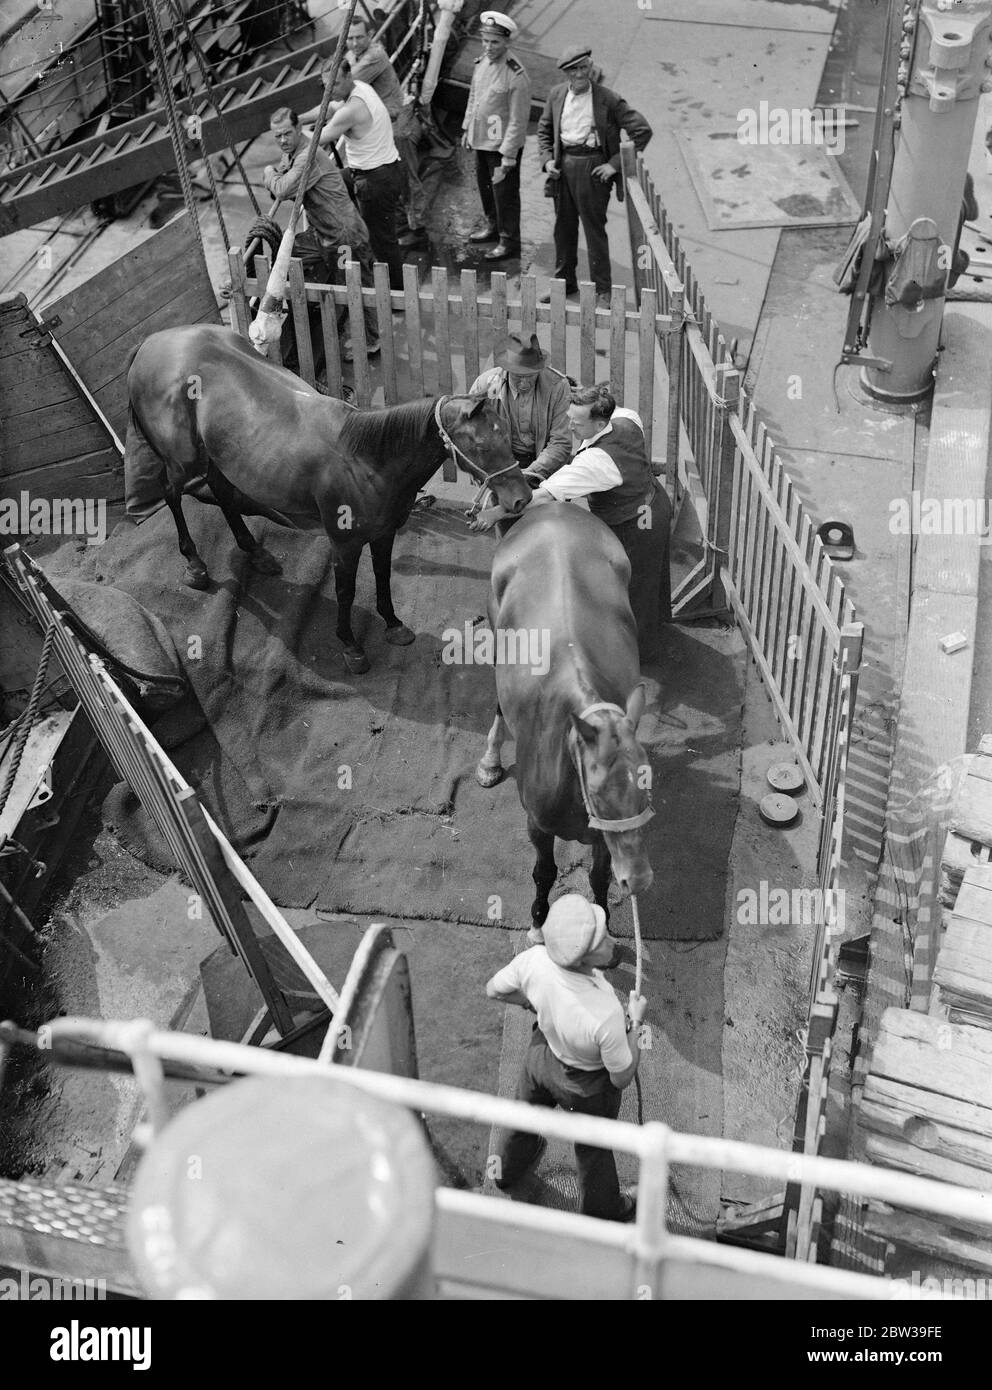 Thirty five polo ponies , which are to be used in the international polo matches at Meadow brook , Long Island , USA were embarked on the American Trader at Royal Albert Docks , London for New York . Photo shows Polo ponies going aboard the American Trader at Royal Albert Docks . 26 July 1935 Stock Photo